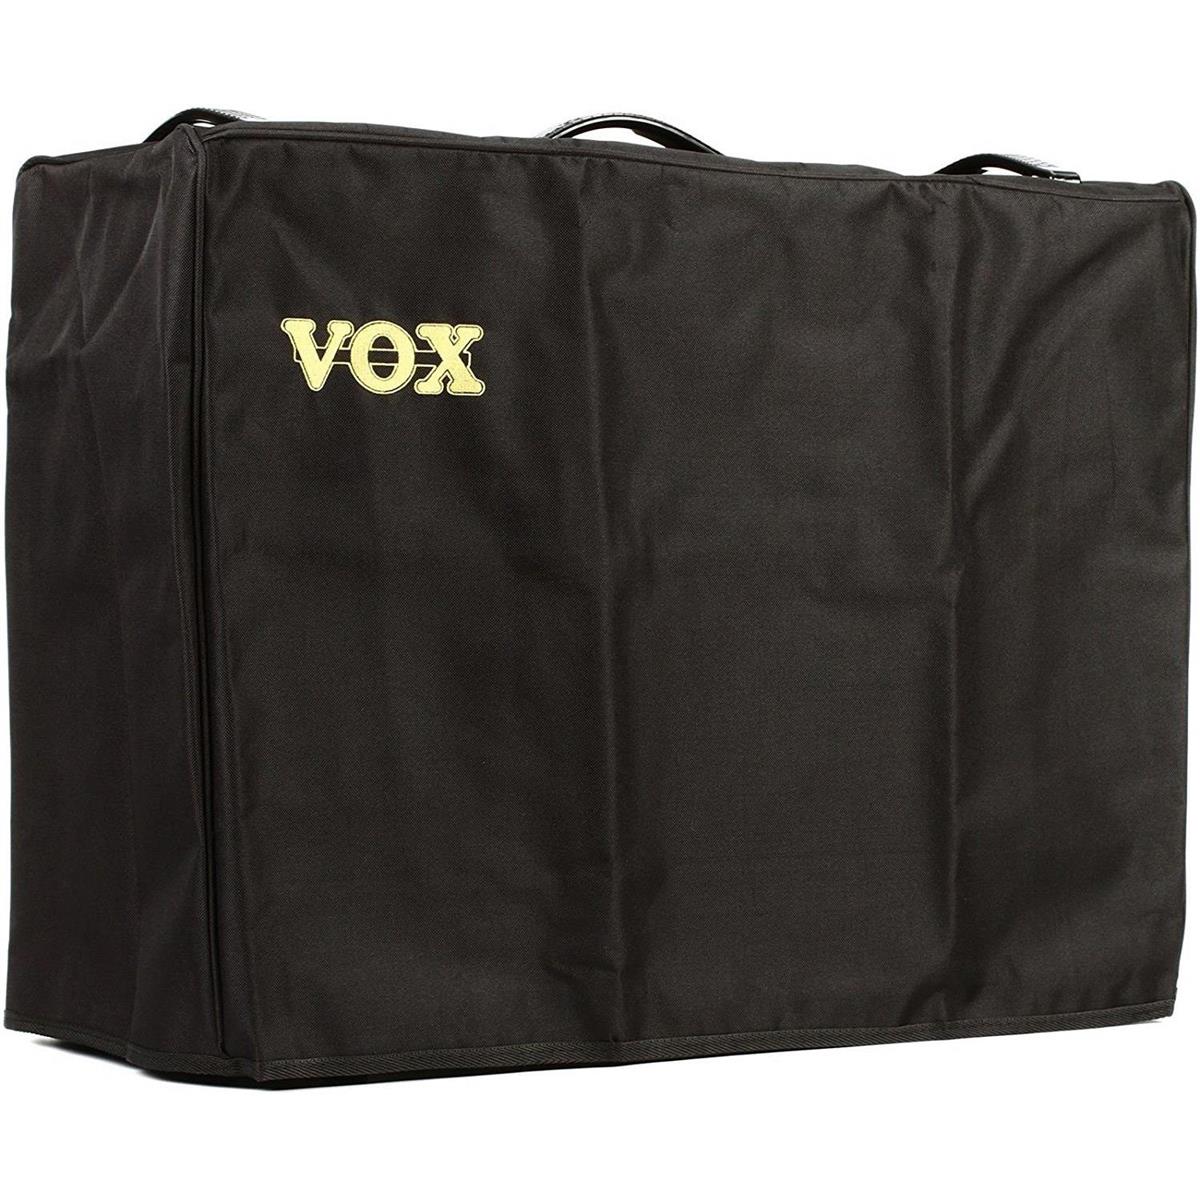 Image of Vox Vinyl Cover for AC10C1 Amplifier